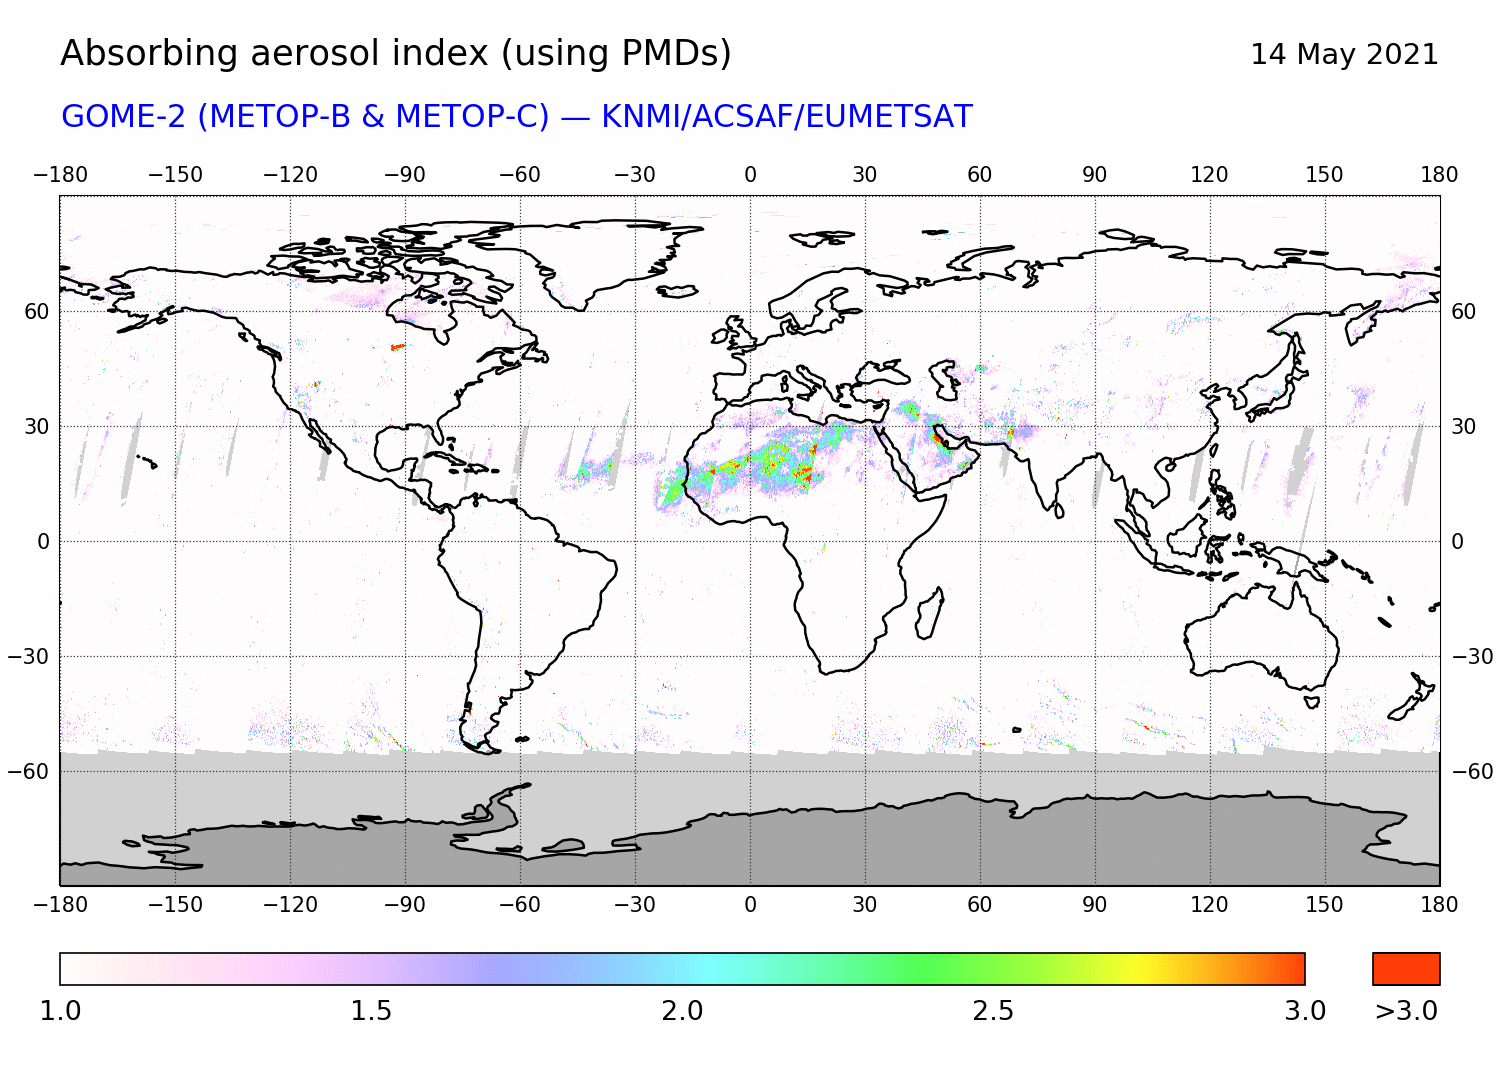 GOME-2 - Absorbing aerosol index of 14 May 2021